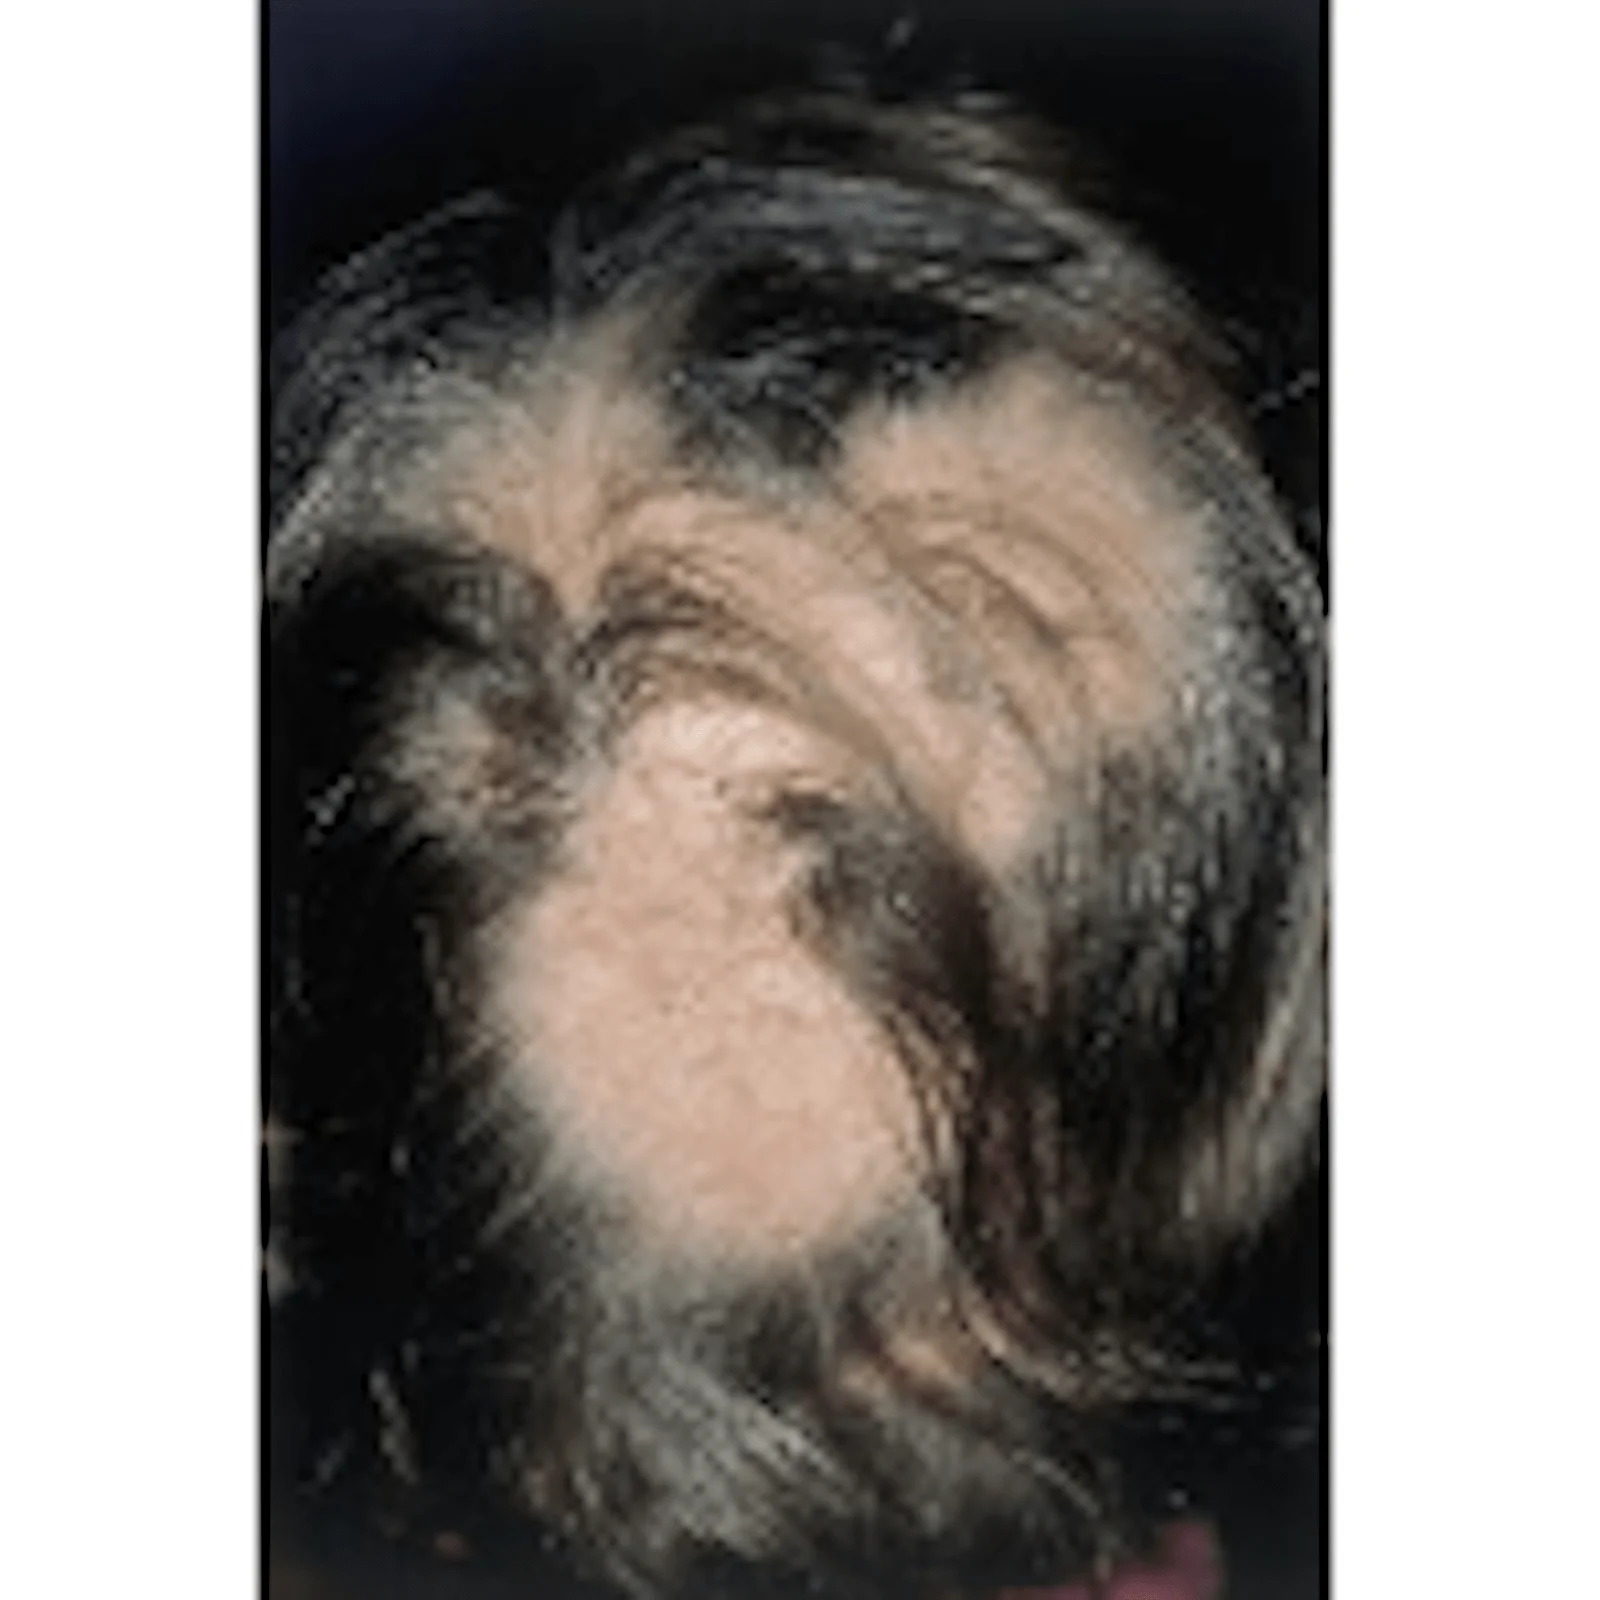 Alopecia Areata is treated effectively with Individualised homeopathic treatment at HomeopathyOne.